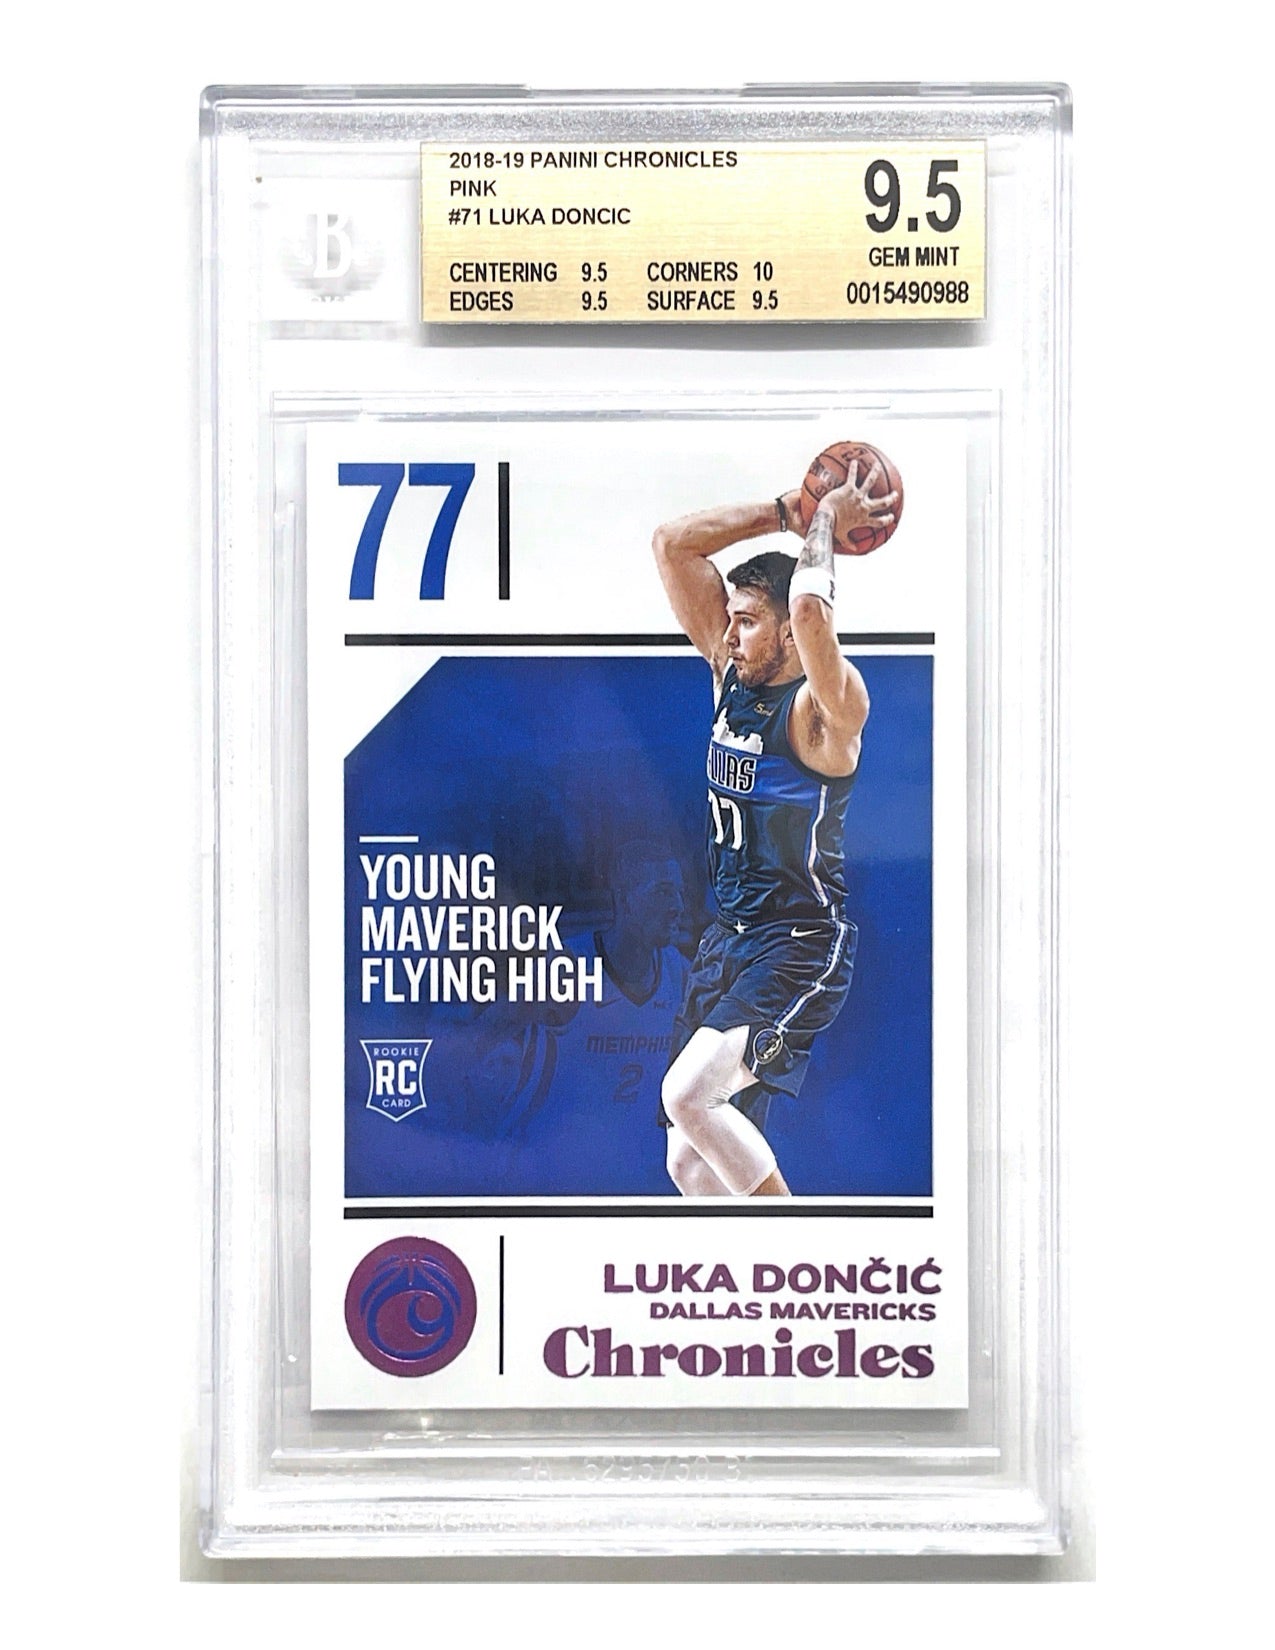 Luka Doncic 2018-19 Panini Chronicles Pink Rookie #71 - BGS 9.5